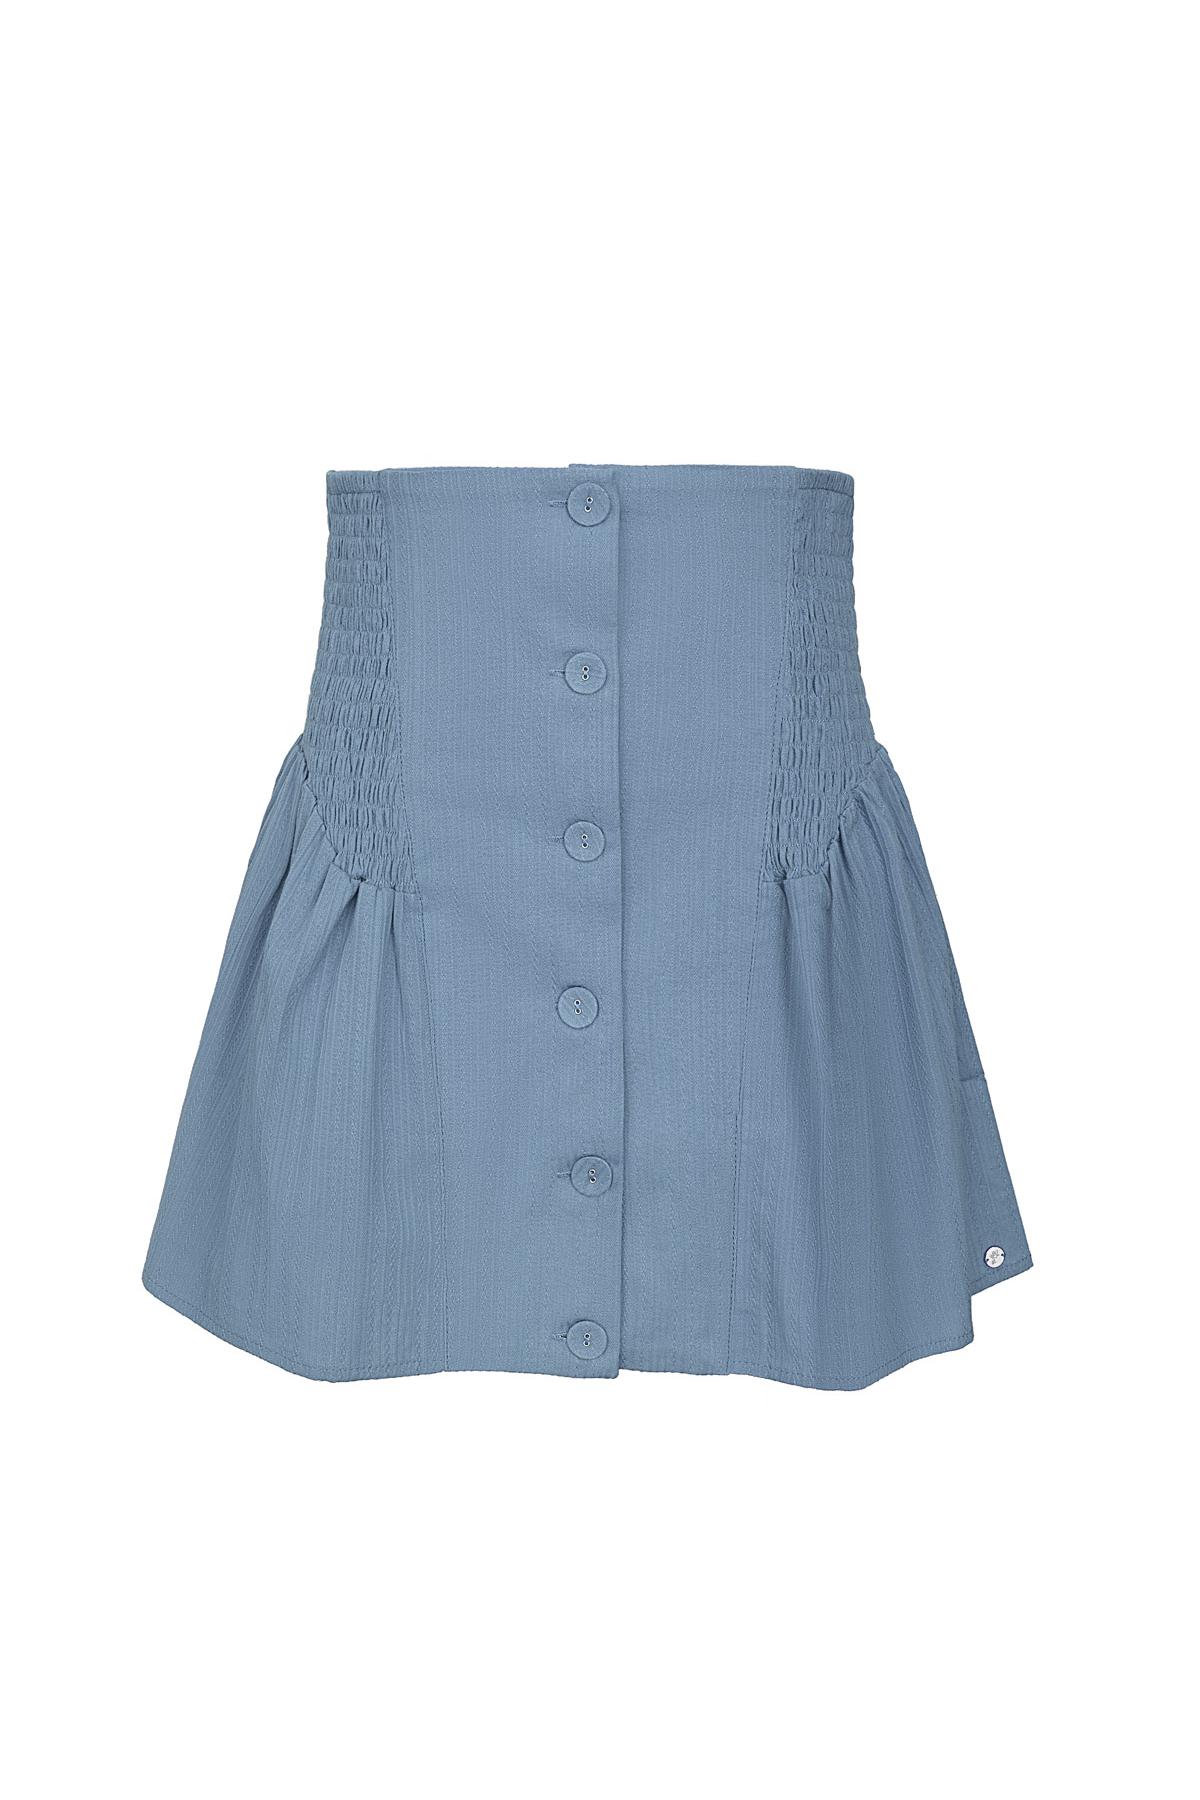 Skirt with buttons and smock detail Blue M 